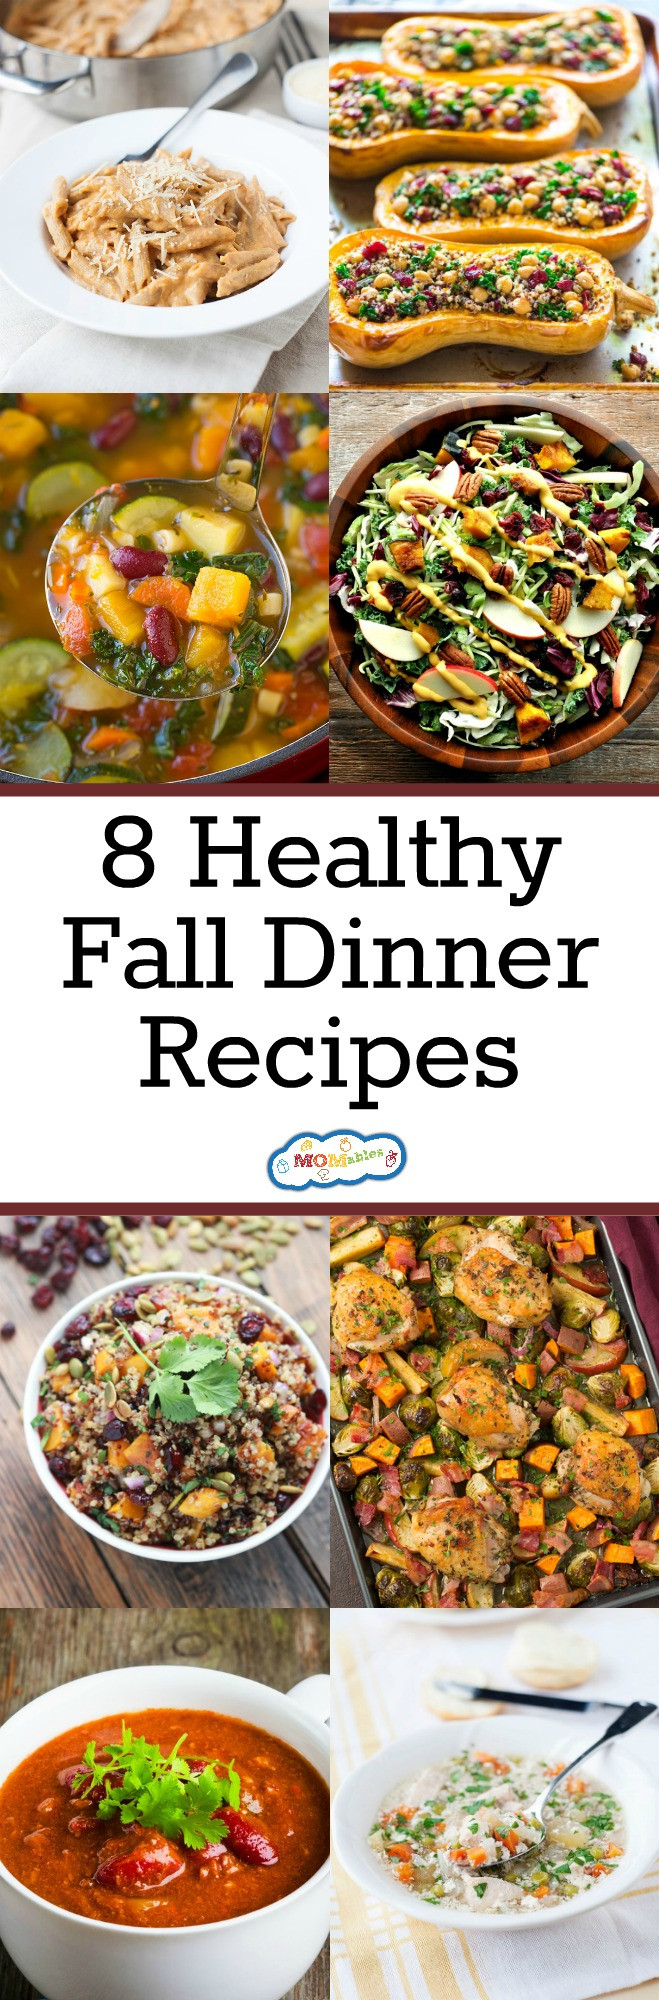 Healthy Fall Dinner Recipes
 8 Healthy Fall Dinner Recipes MOMables Good Food